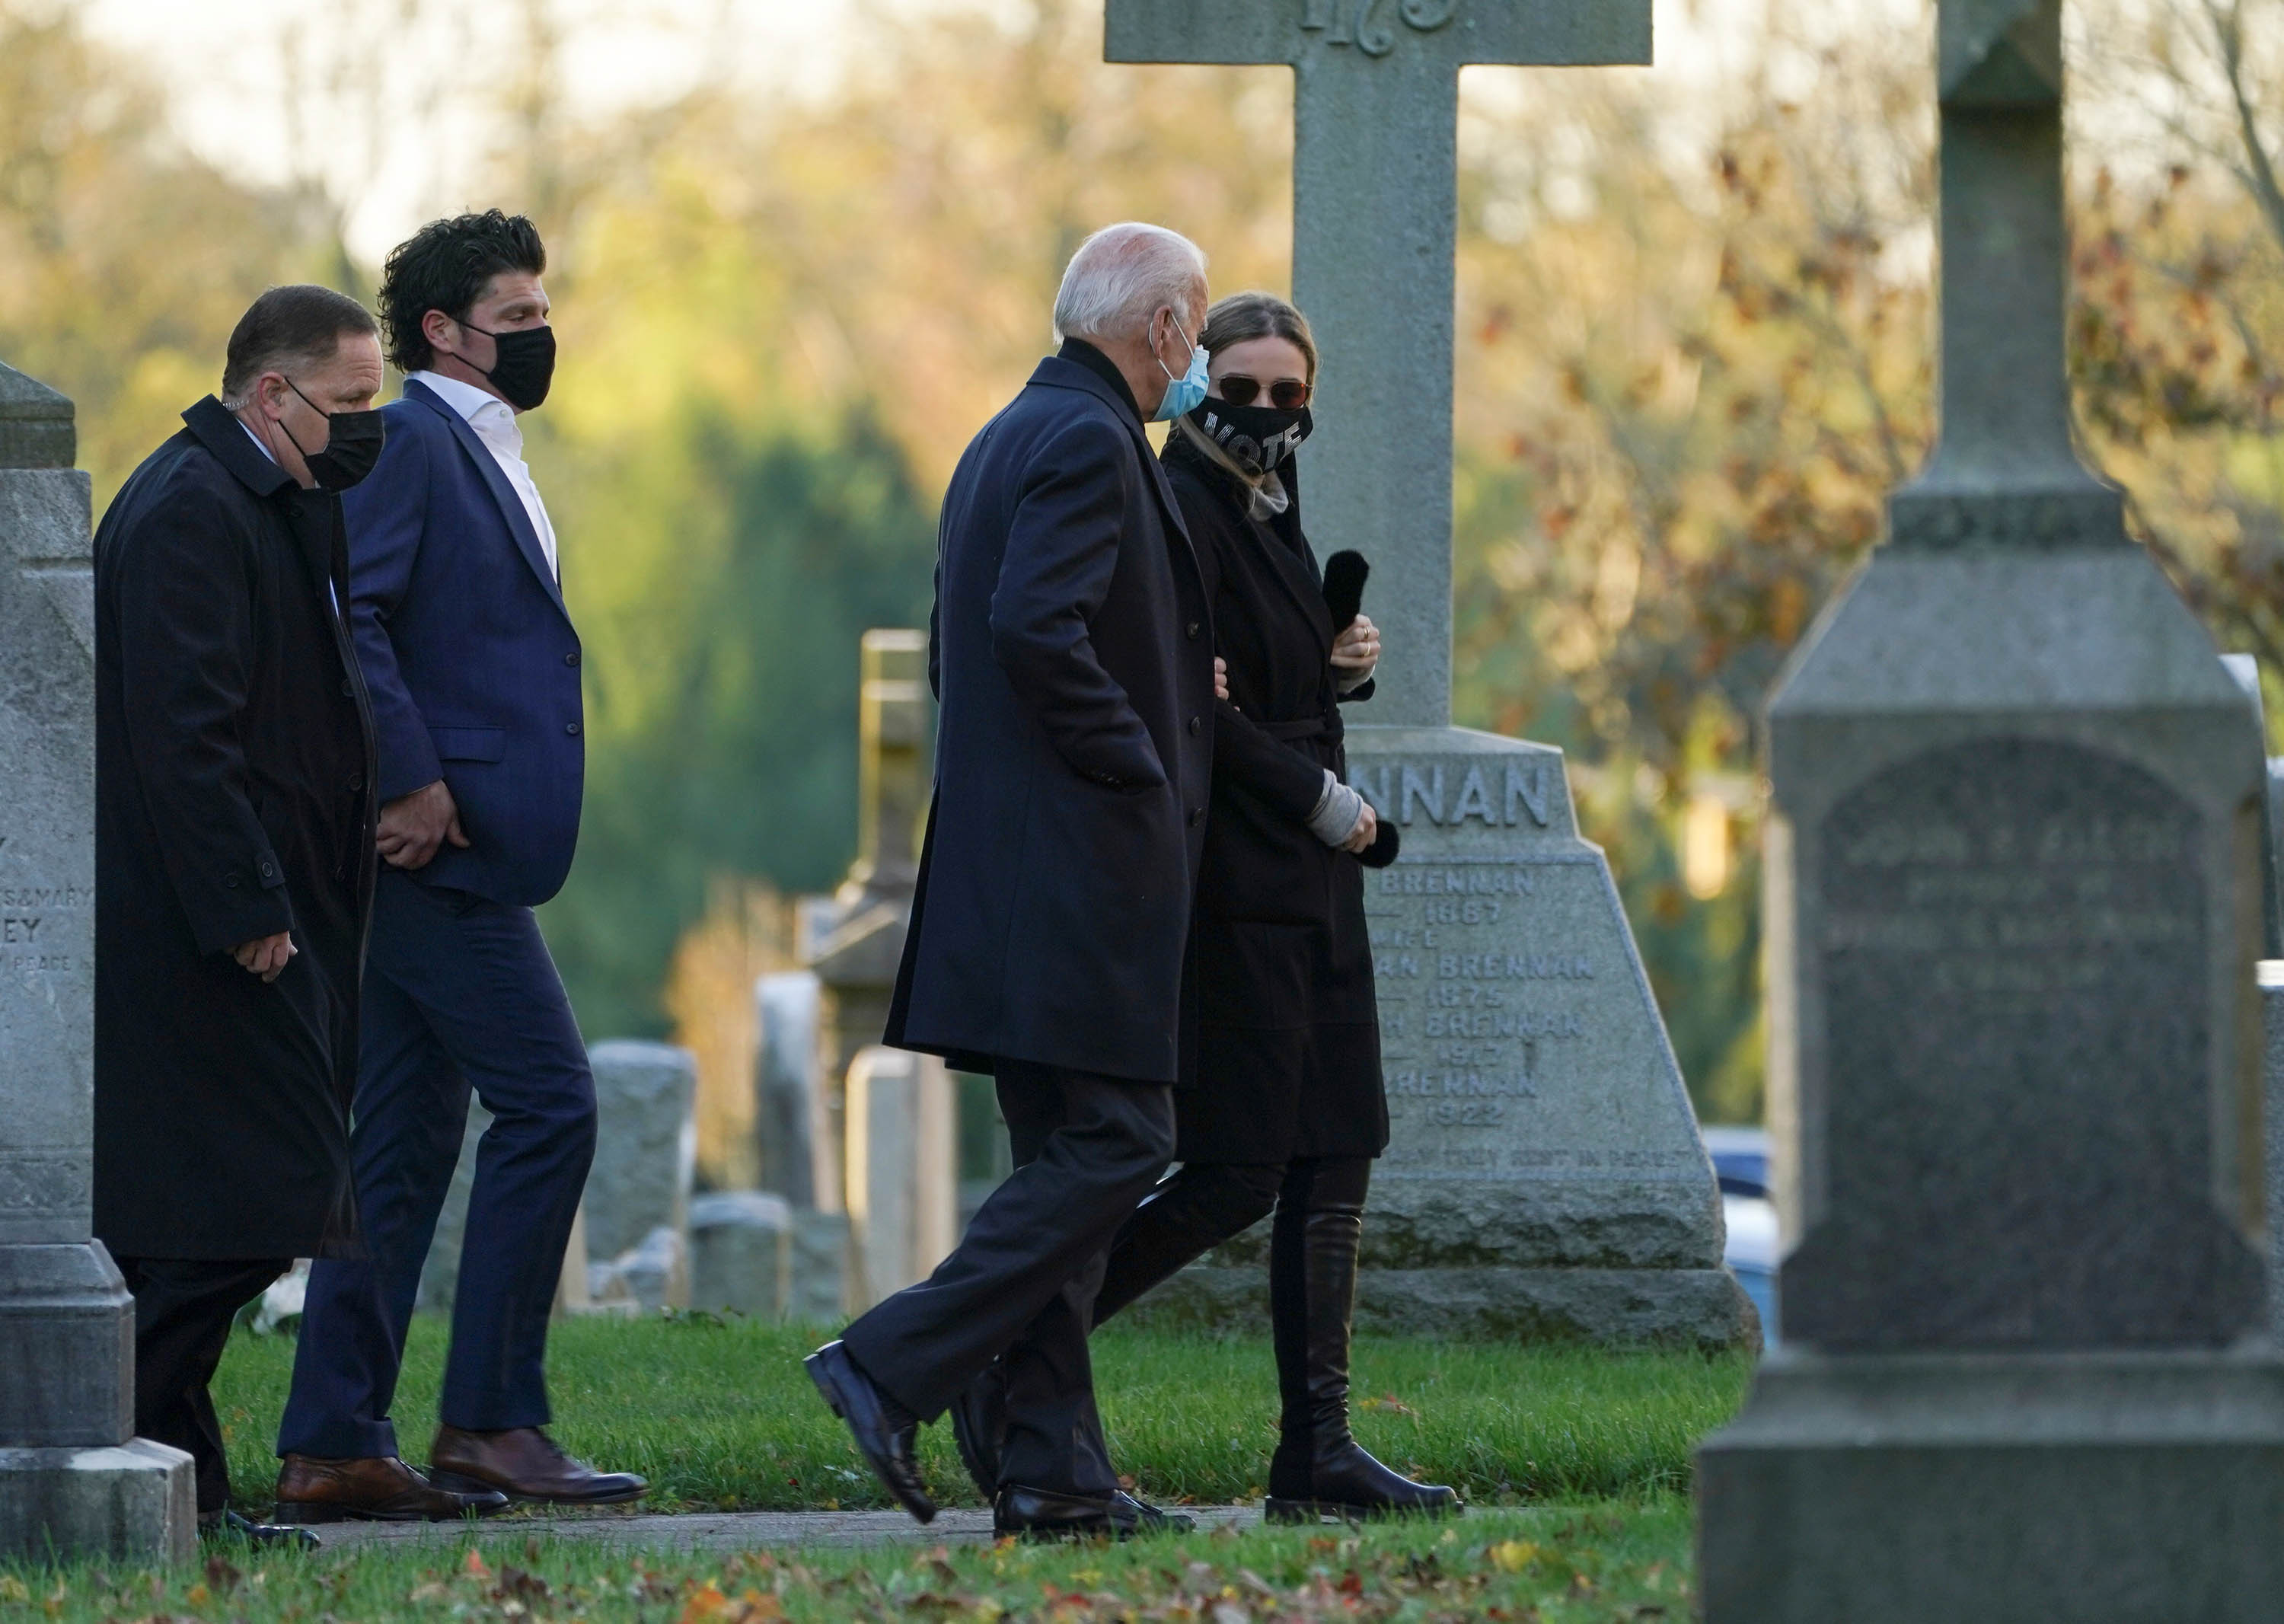 US Democratic presidential candidate Joe Biden walks with granddaughter Finnegan as he attends church on election day in the Wilmington area on Tuesday, November 3.